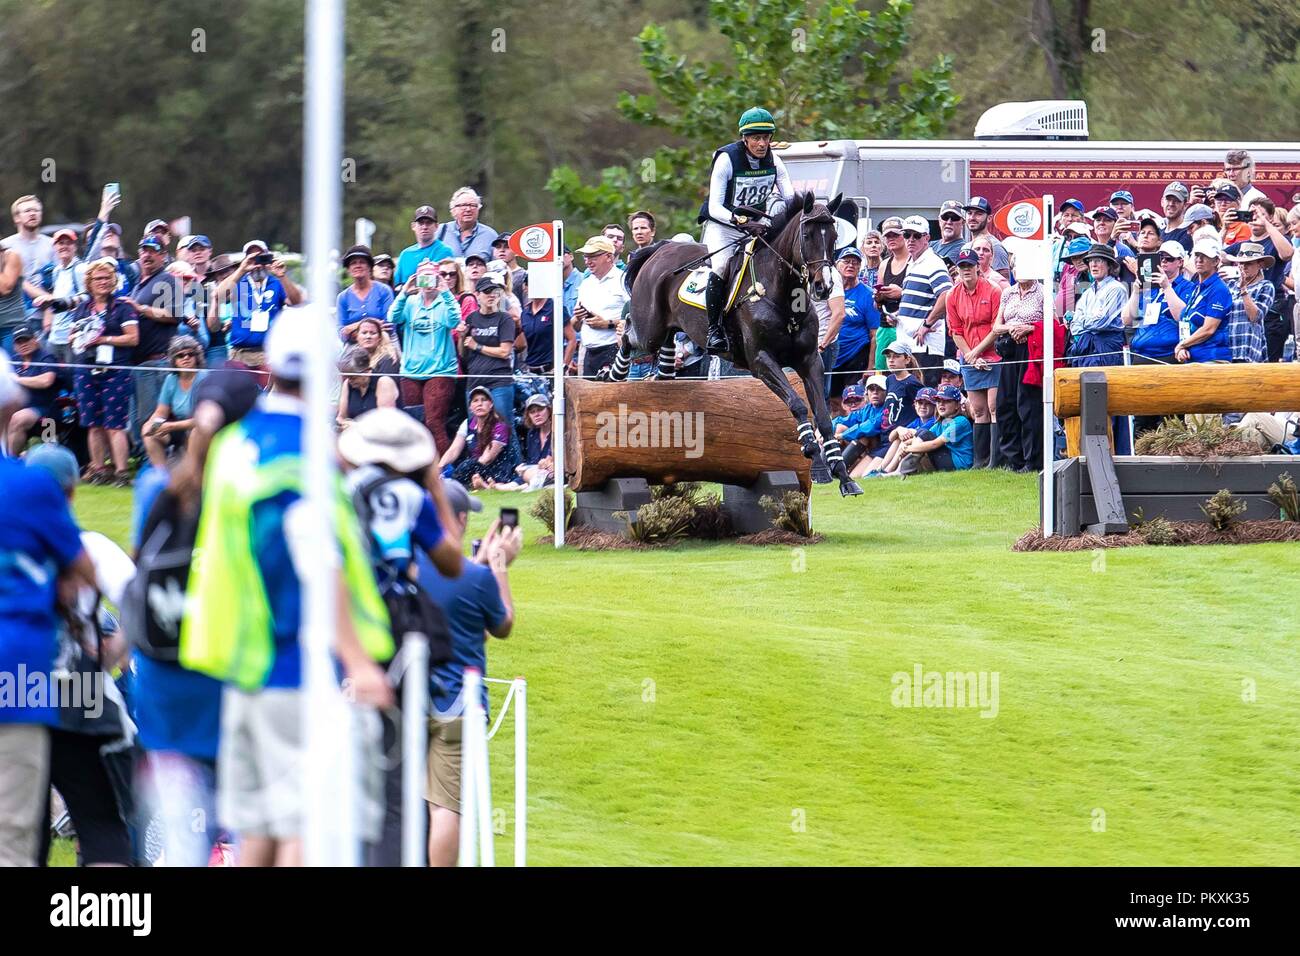 North Carolina, USA. 15th Sept 2018. Marcelo Tosi. Glenfly. BRA. Eventing Cross country Day 5. World Equestrian Games. WEG 2018 Tryon. North Carolina. USA. 15/09/2018. Credit: Sport In Pictures/Alamy Live News Stock Photo